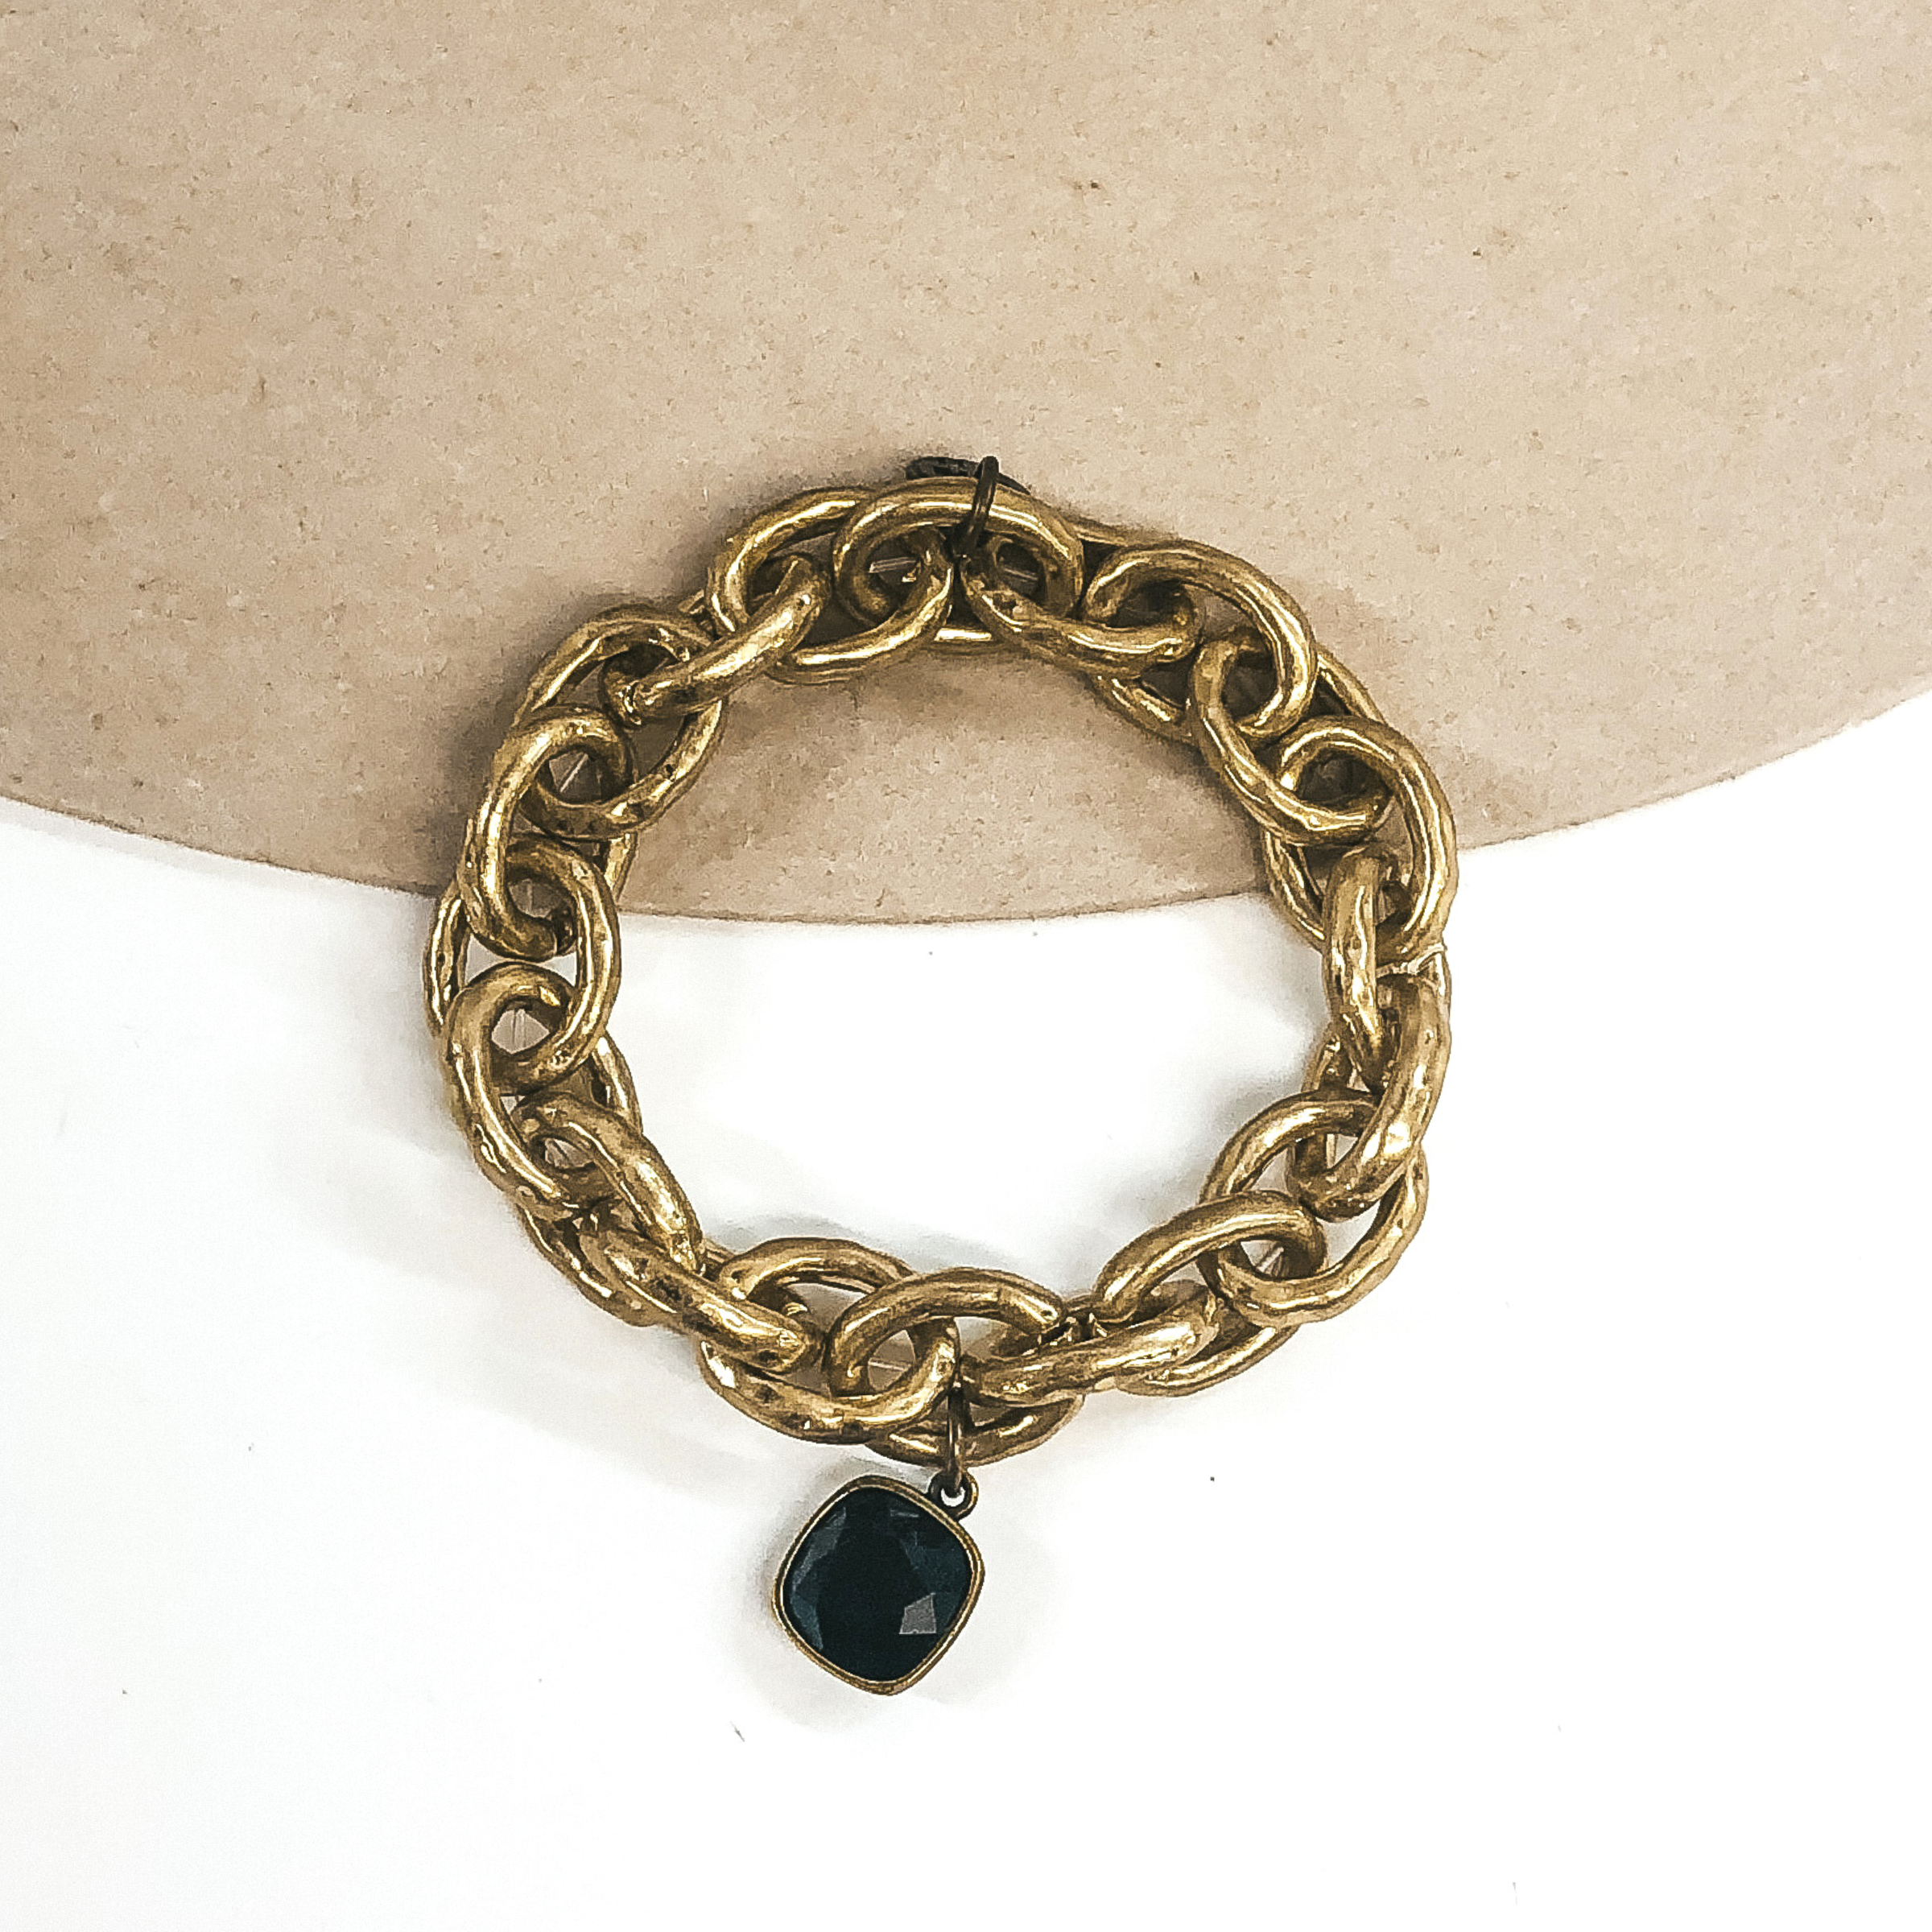 Chunky matte gold chain bracelet with a hanging cushion cut black crystal that is in a bronze setting. This bracelet is pictured on a beige and white background.